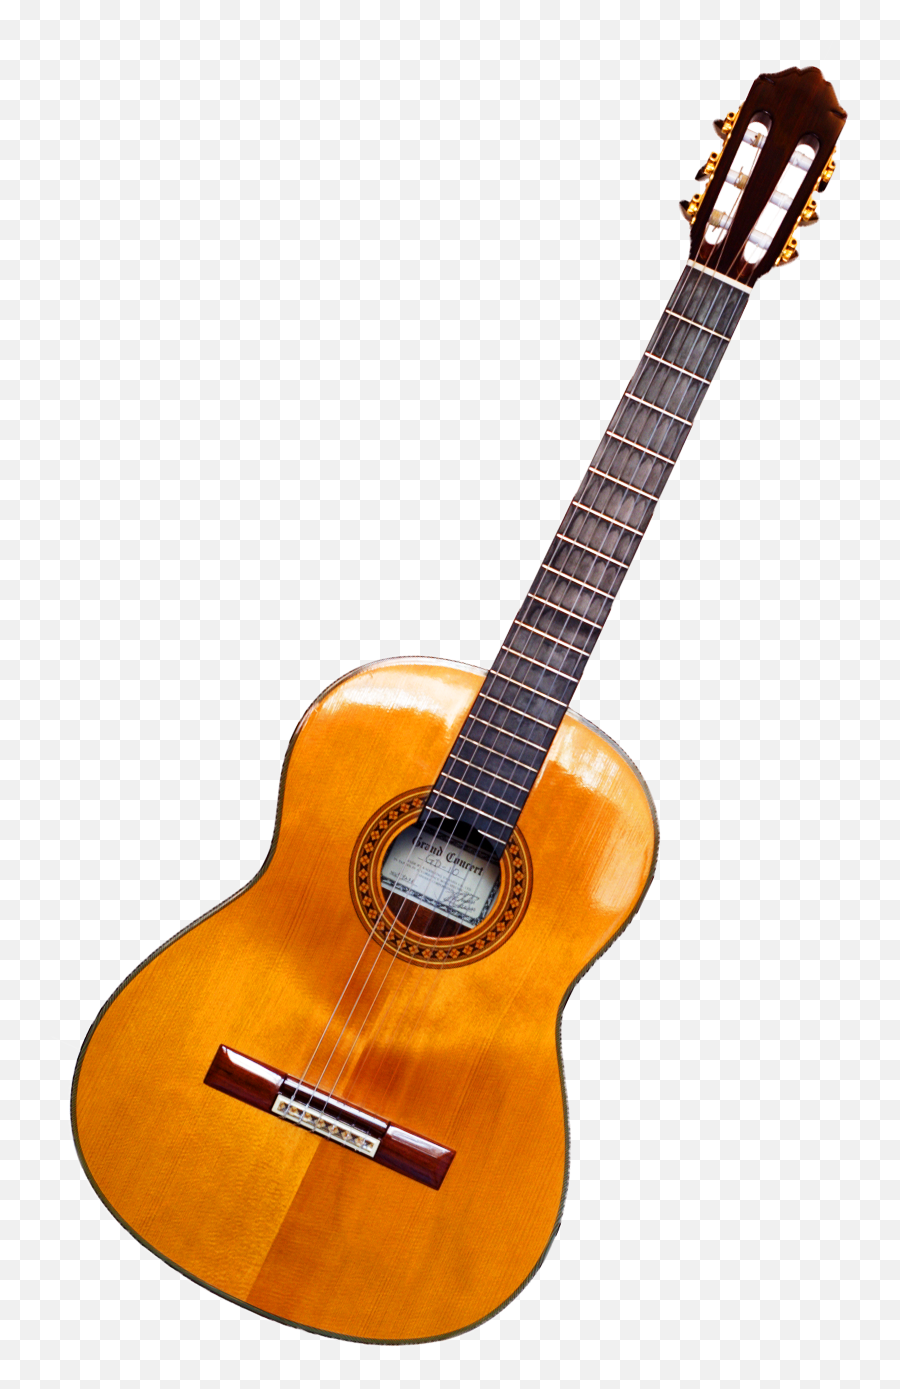 Acoustic Guitar Png Transparent Images - Difference Between Guitar And Ukulele,Guitar Png